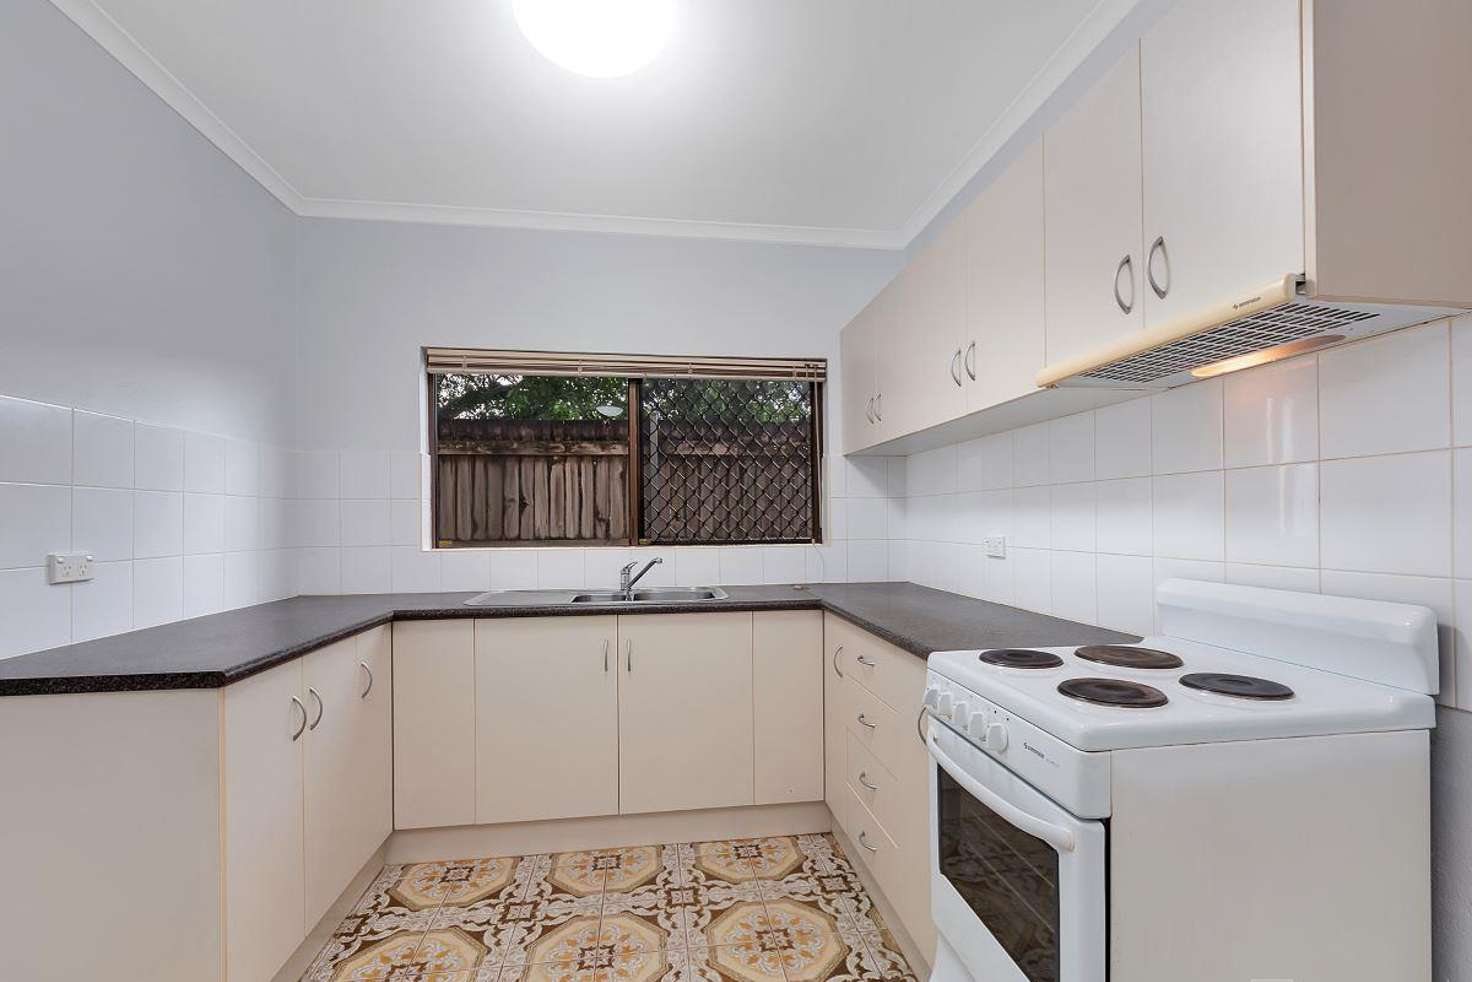 Main view of Homely unit listing, 5/193-195 Spence Street, Bungalow QLD 4870